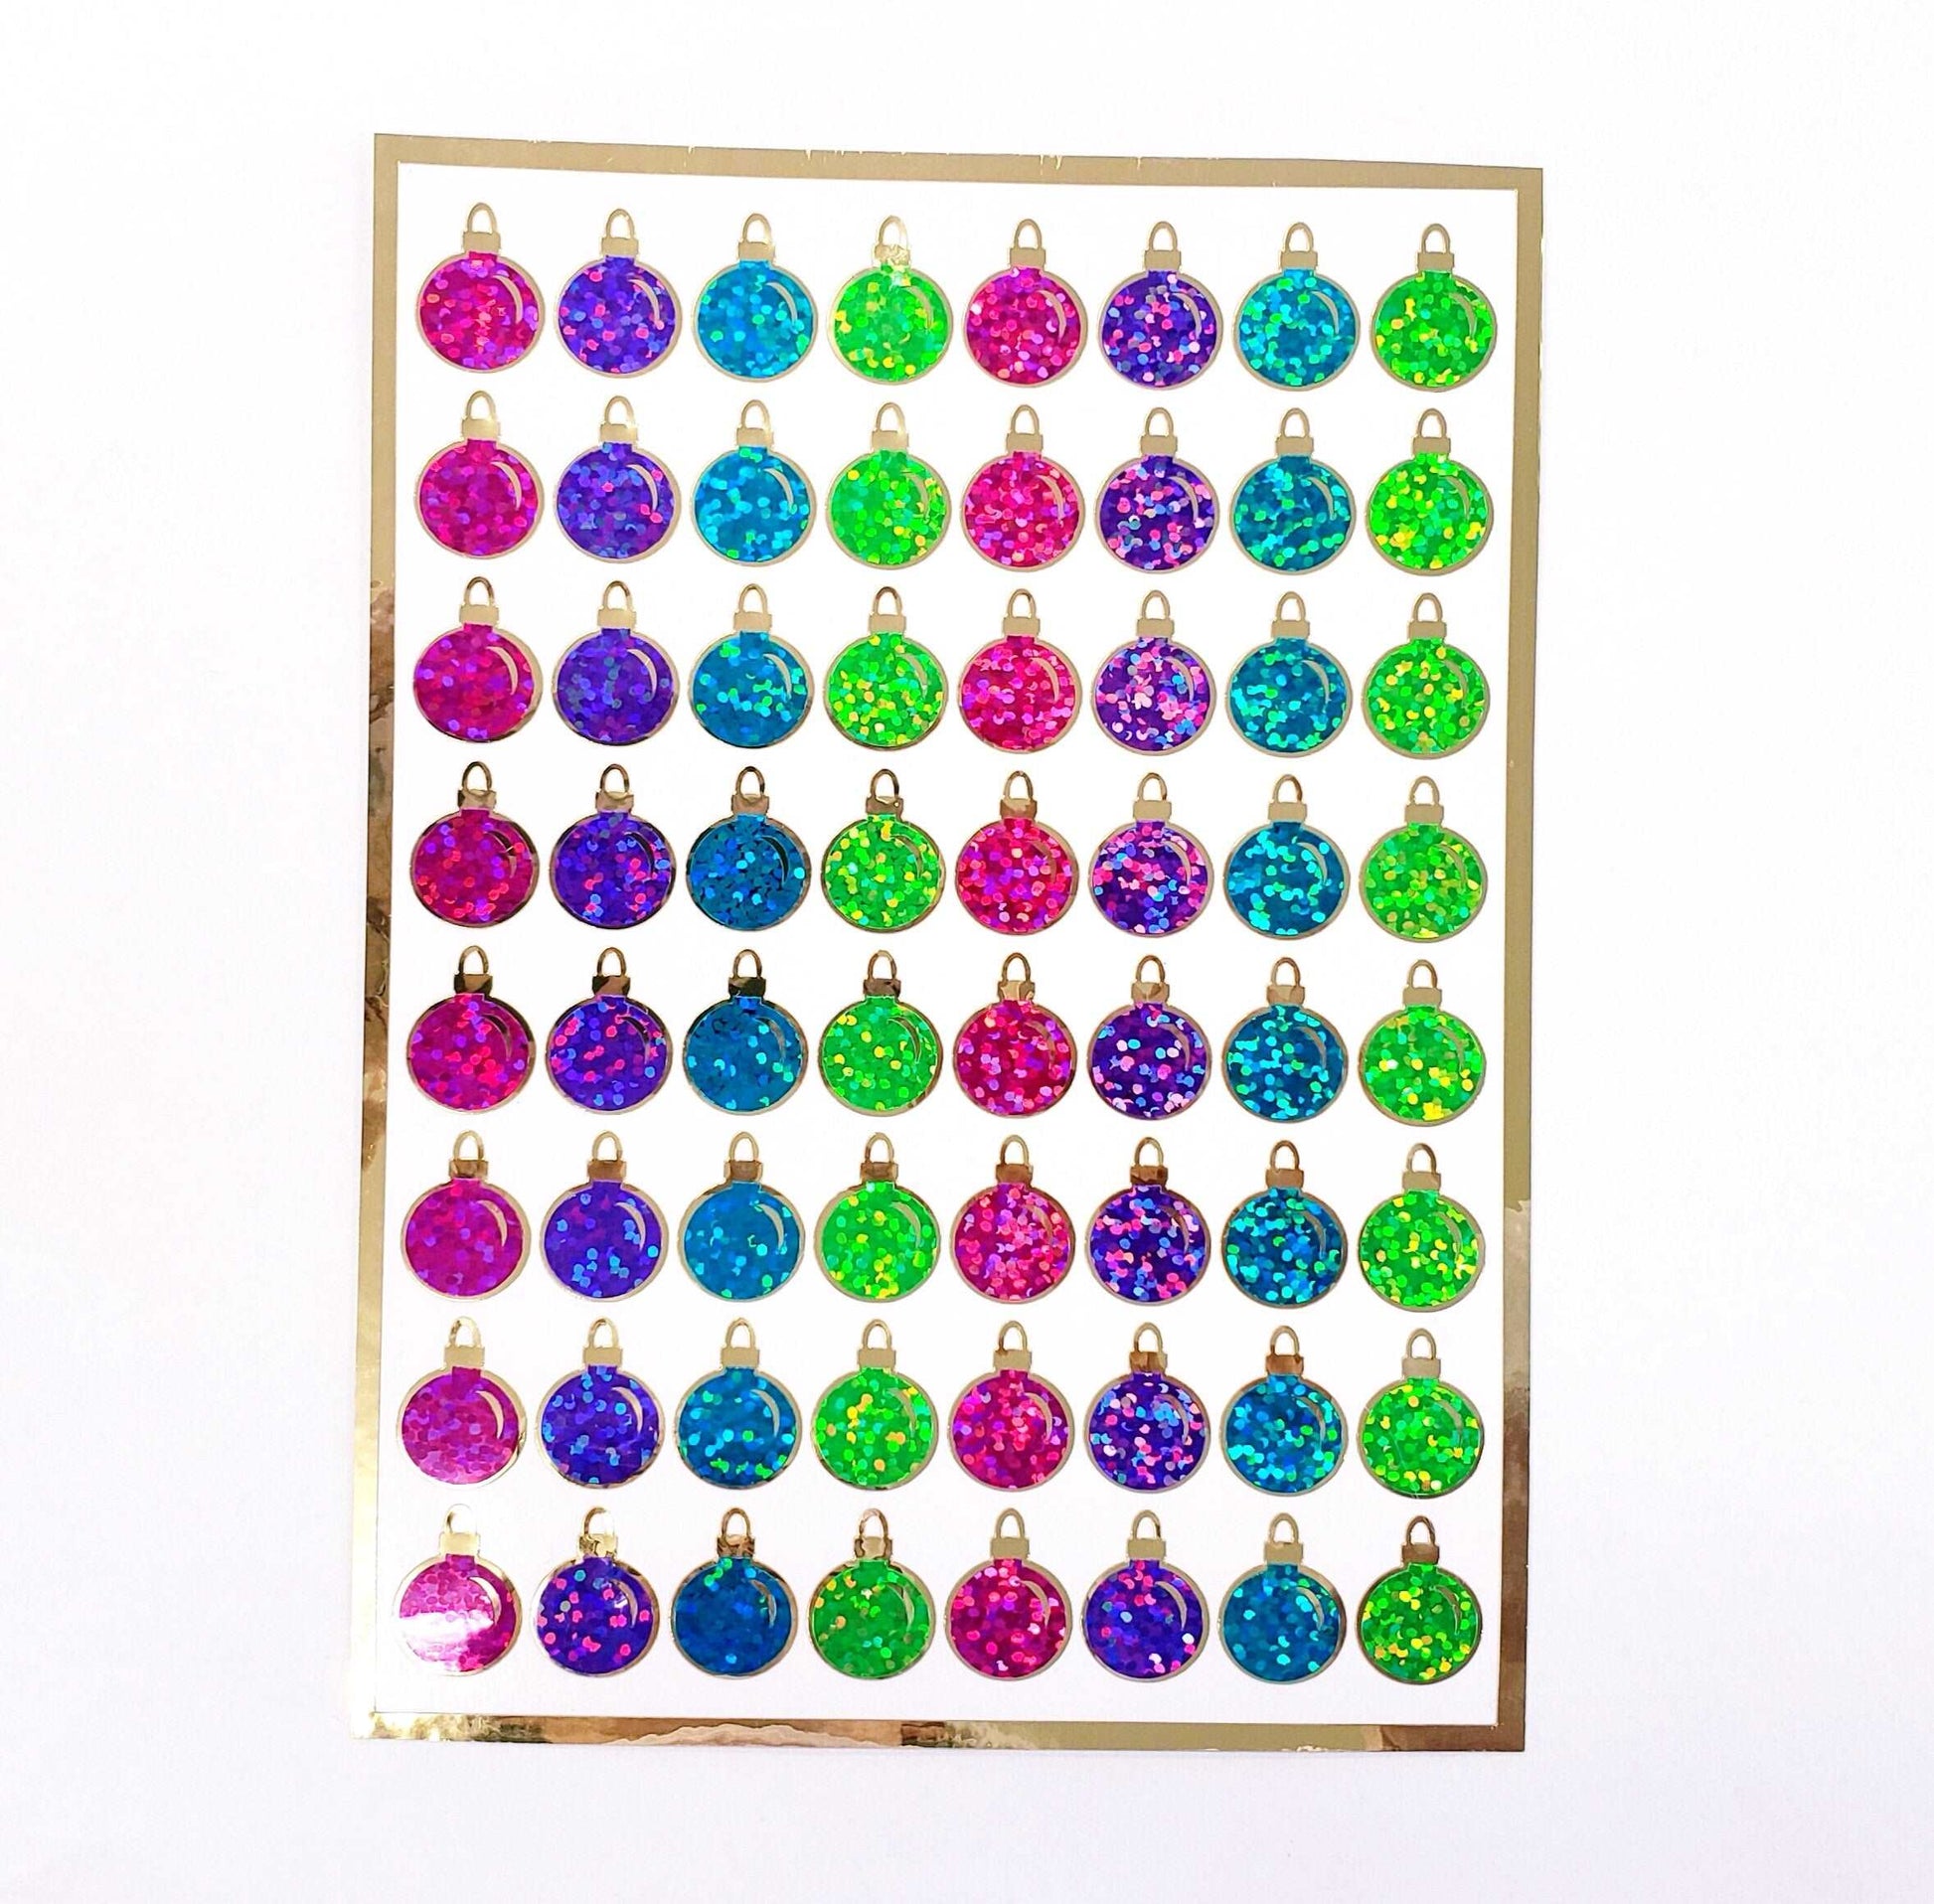 Christmas Ball Ornaments Sticker Sheet. Set of 64 small bright color balls with gold, vinyl decals for cards, gift tags and advent calendars